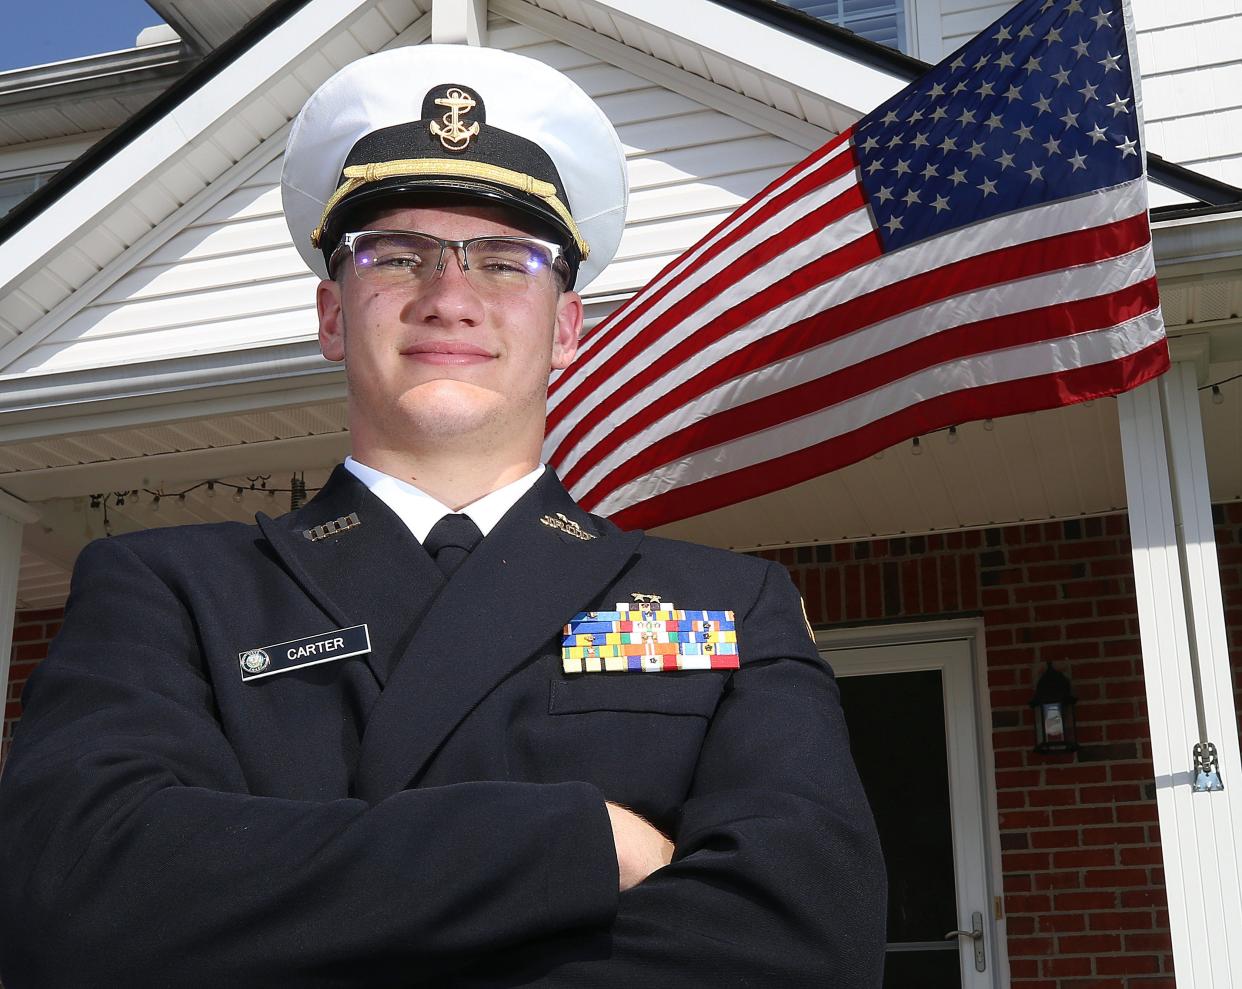 Grove City High School junior Isaac Carter is one of only 20 students in the country to be selected for the U.S. Navy Summer Flight Academy. The eight-week program will take place June 12- Aug. 5 at Delaware State University in Dover, Delaware.